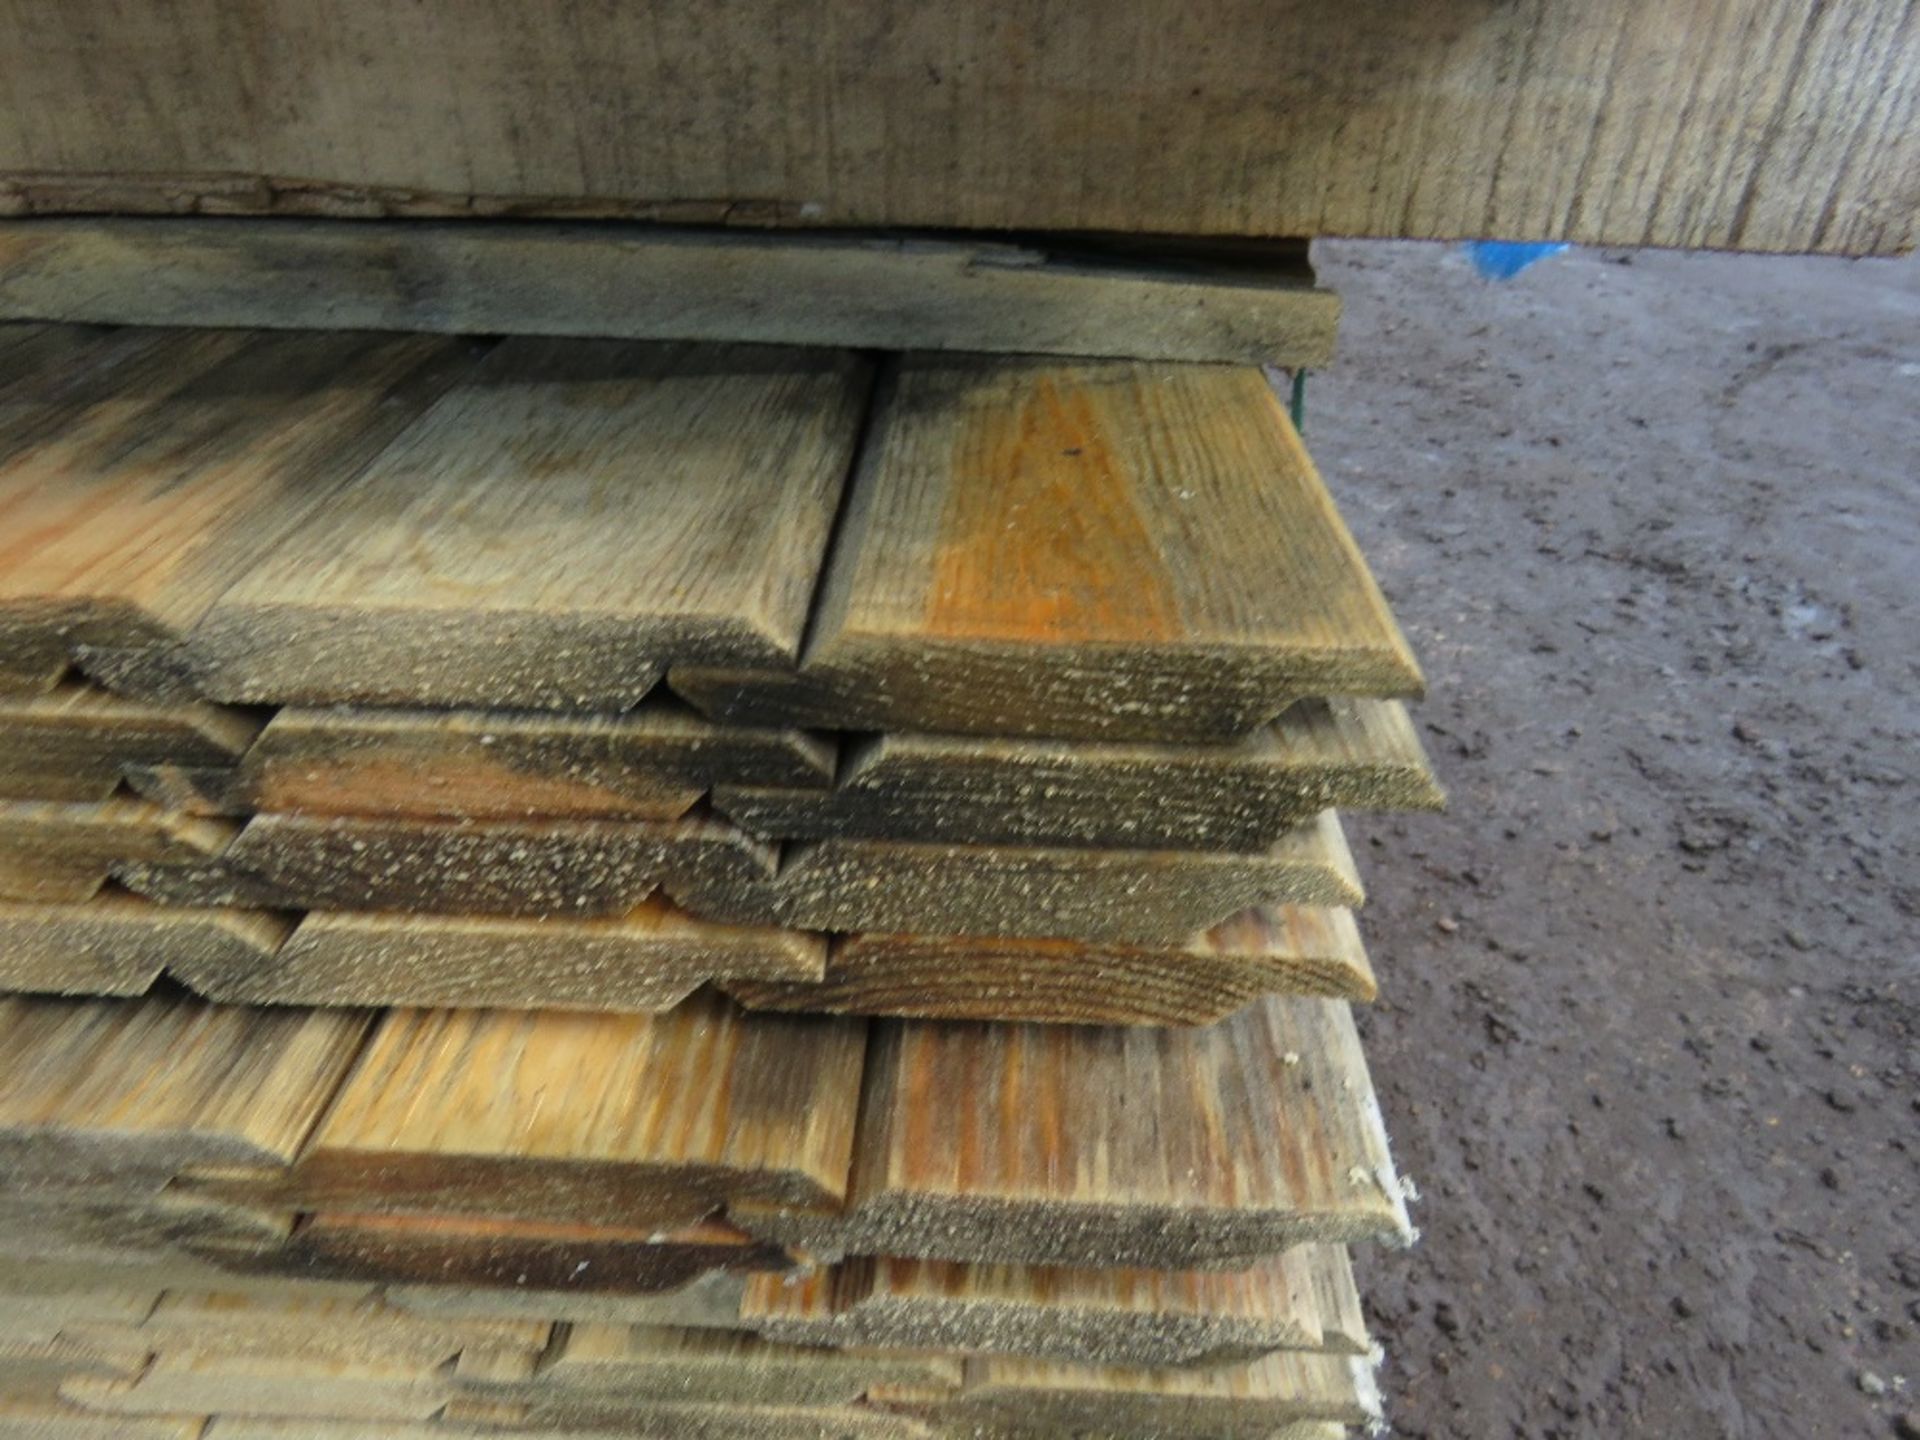 PACK OF UNTREATED SHIPLAP CLADDING TIMBER 1.73M X 10CM WIDTH APPROX. - Image 3 of 3